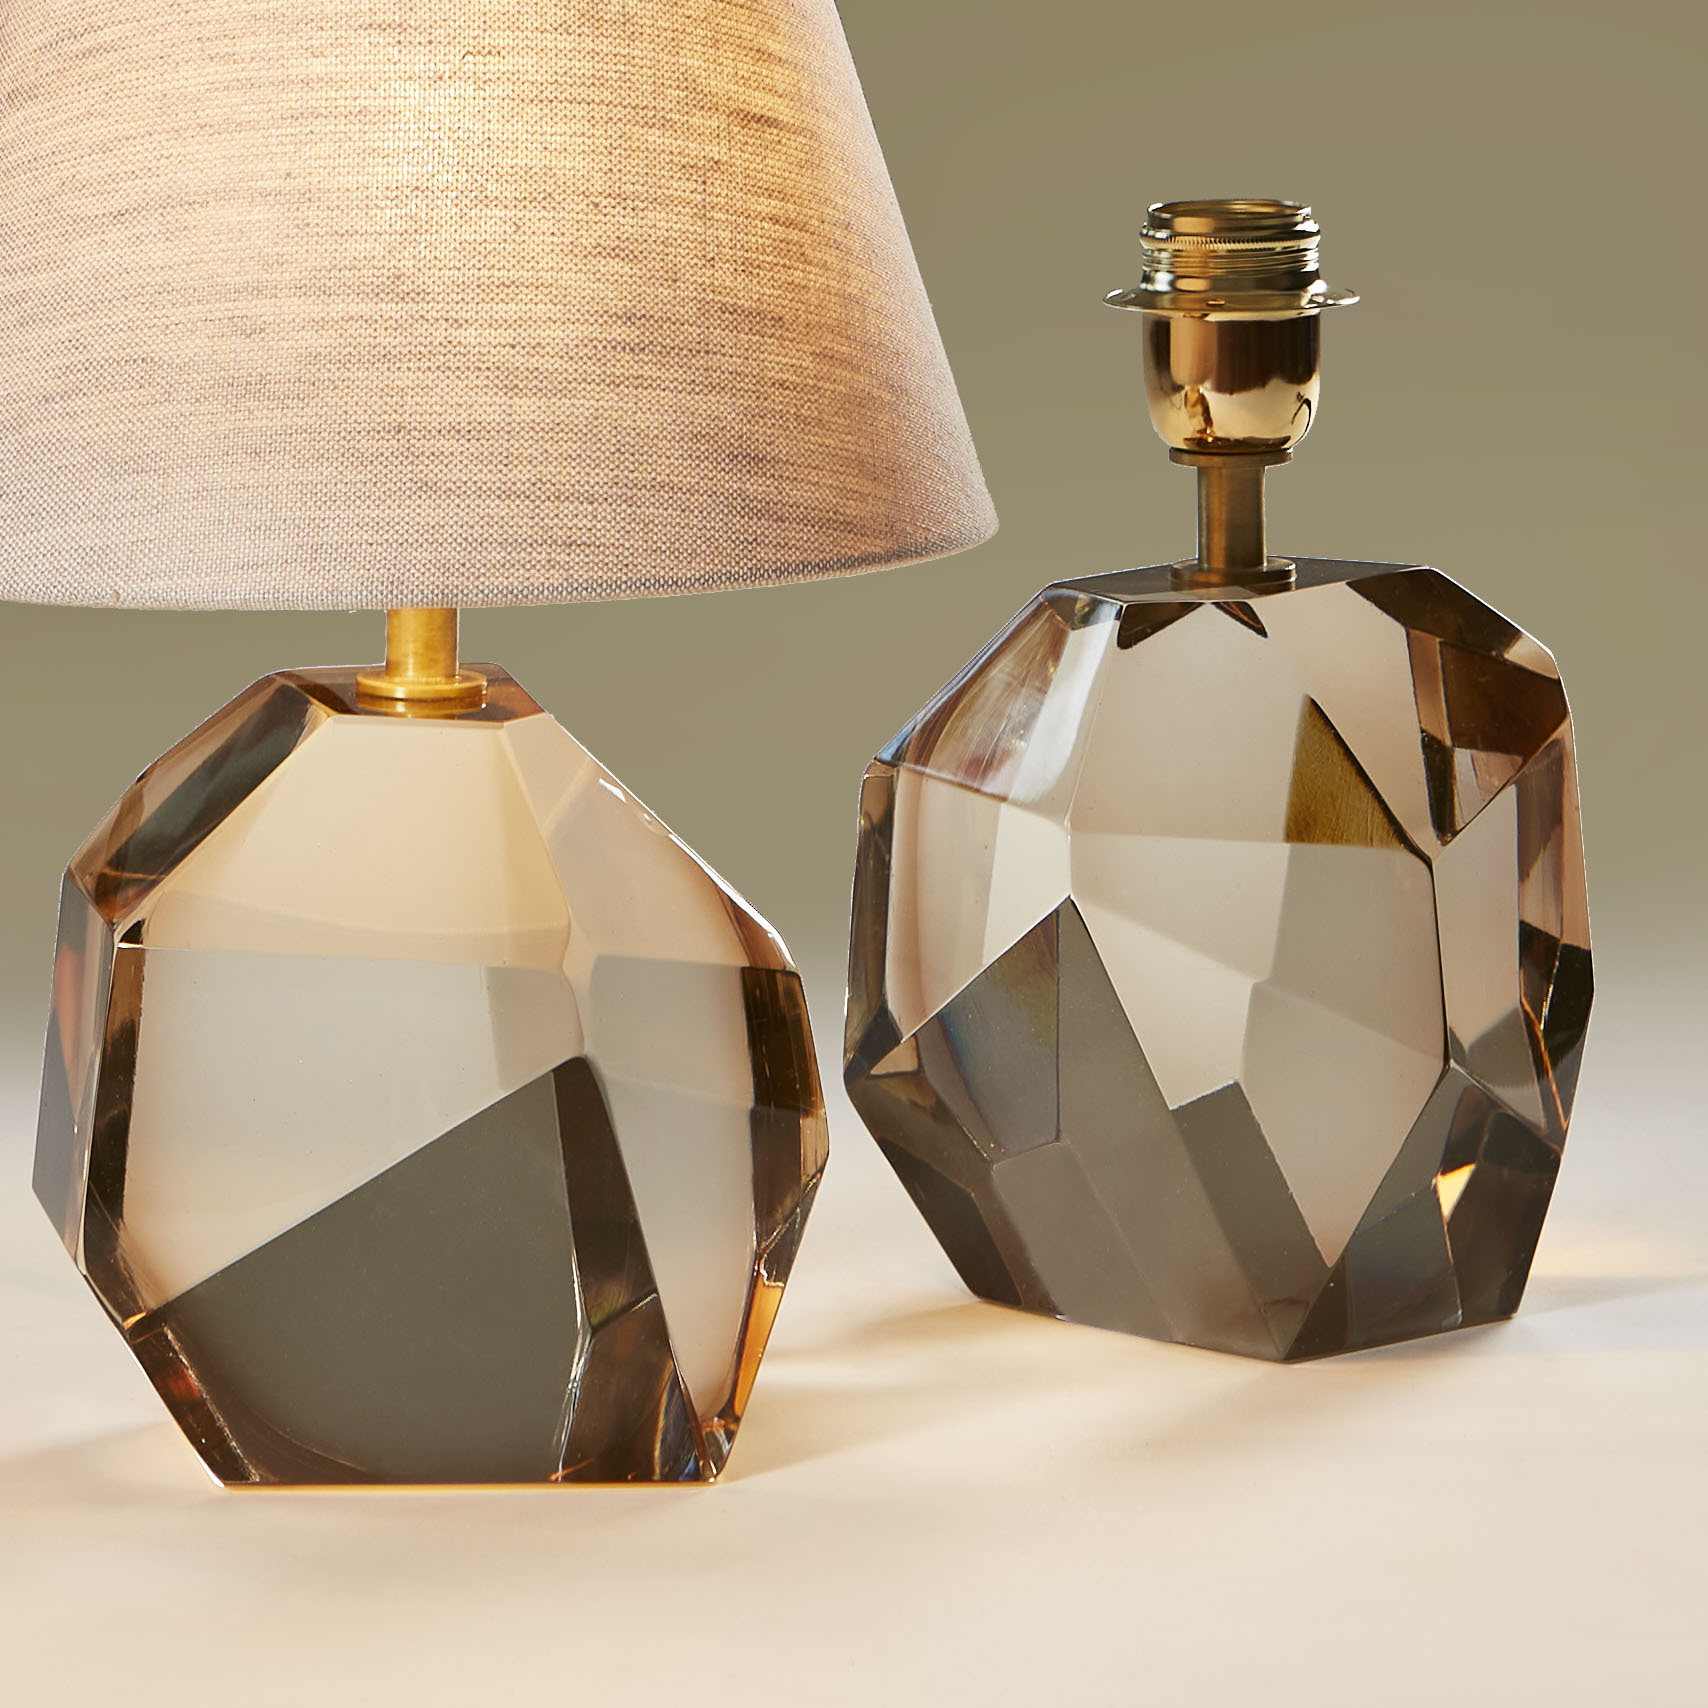 The image for Pair Of Pale Pink Rock Lamps 099 V1